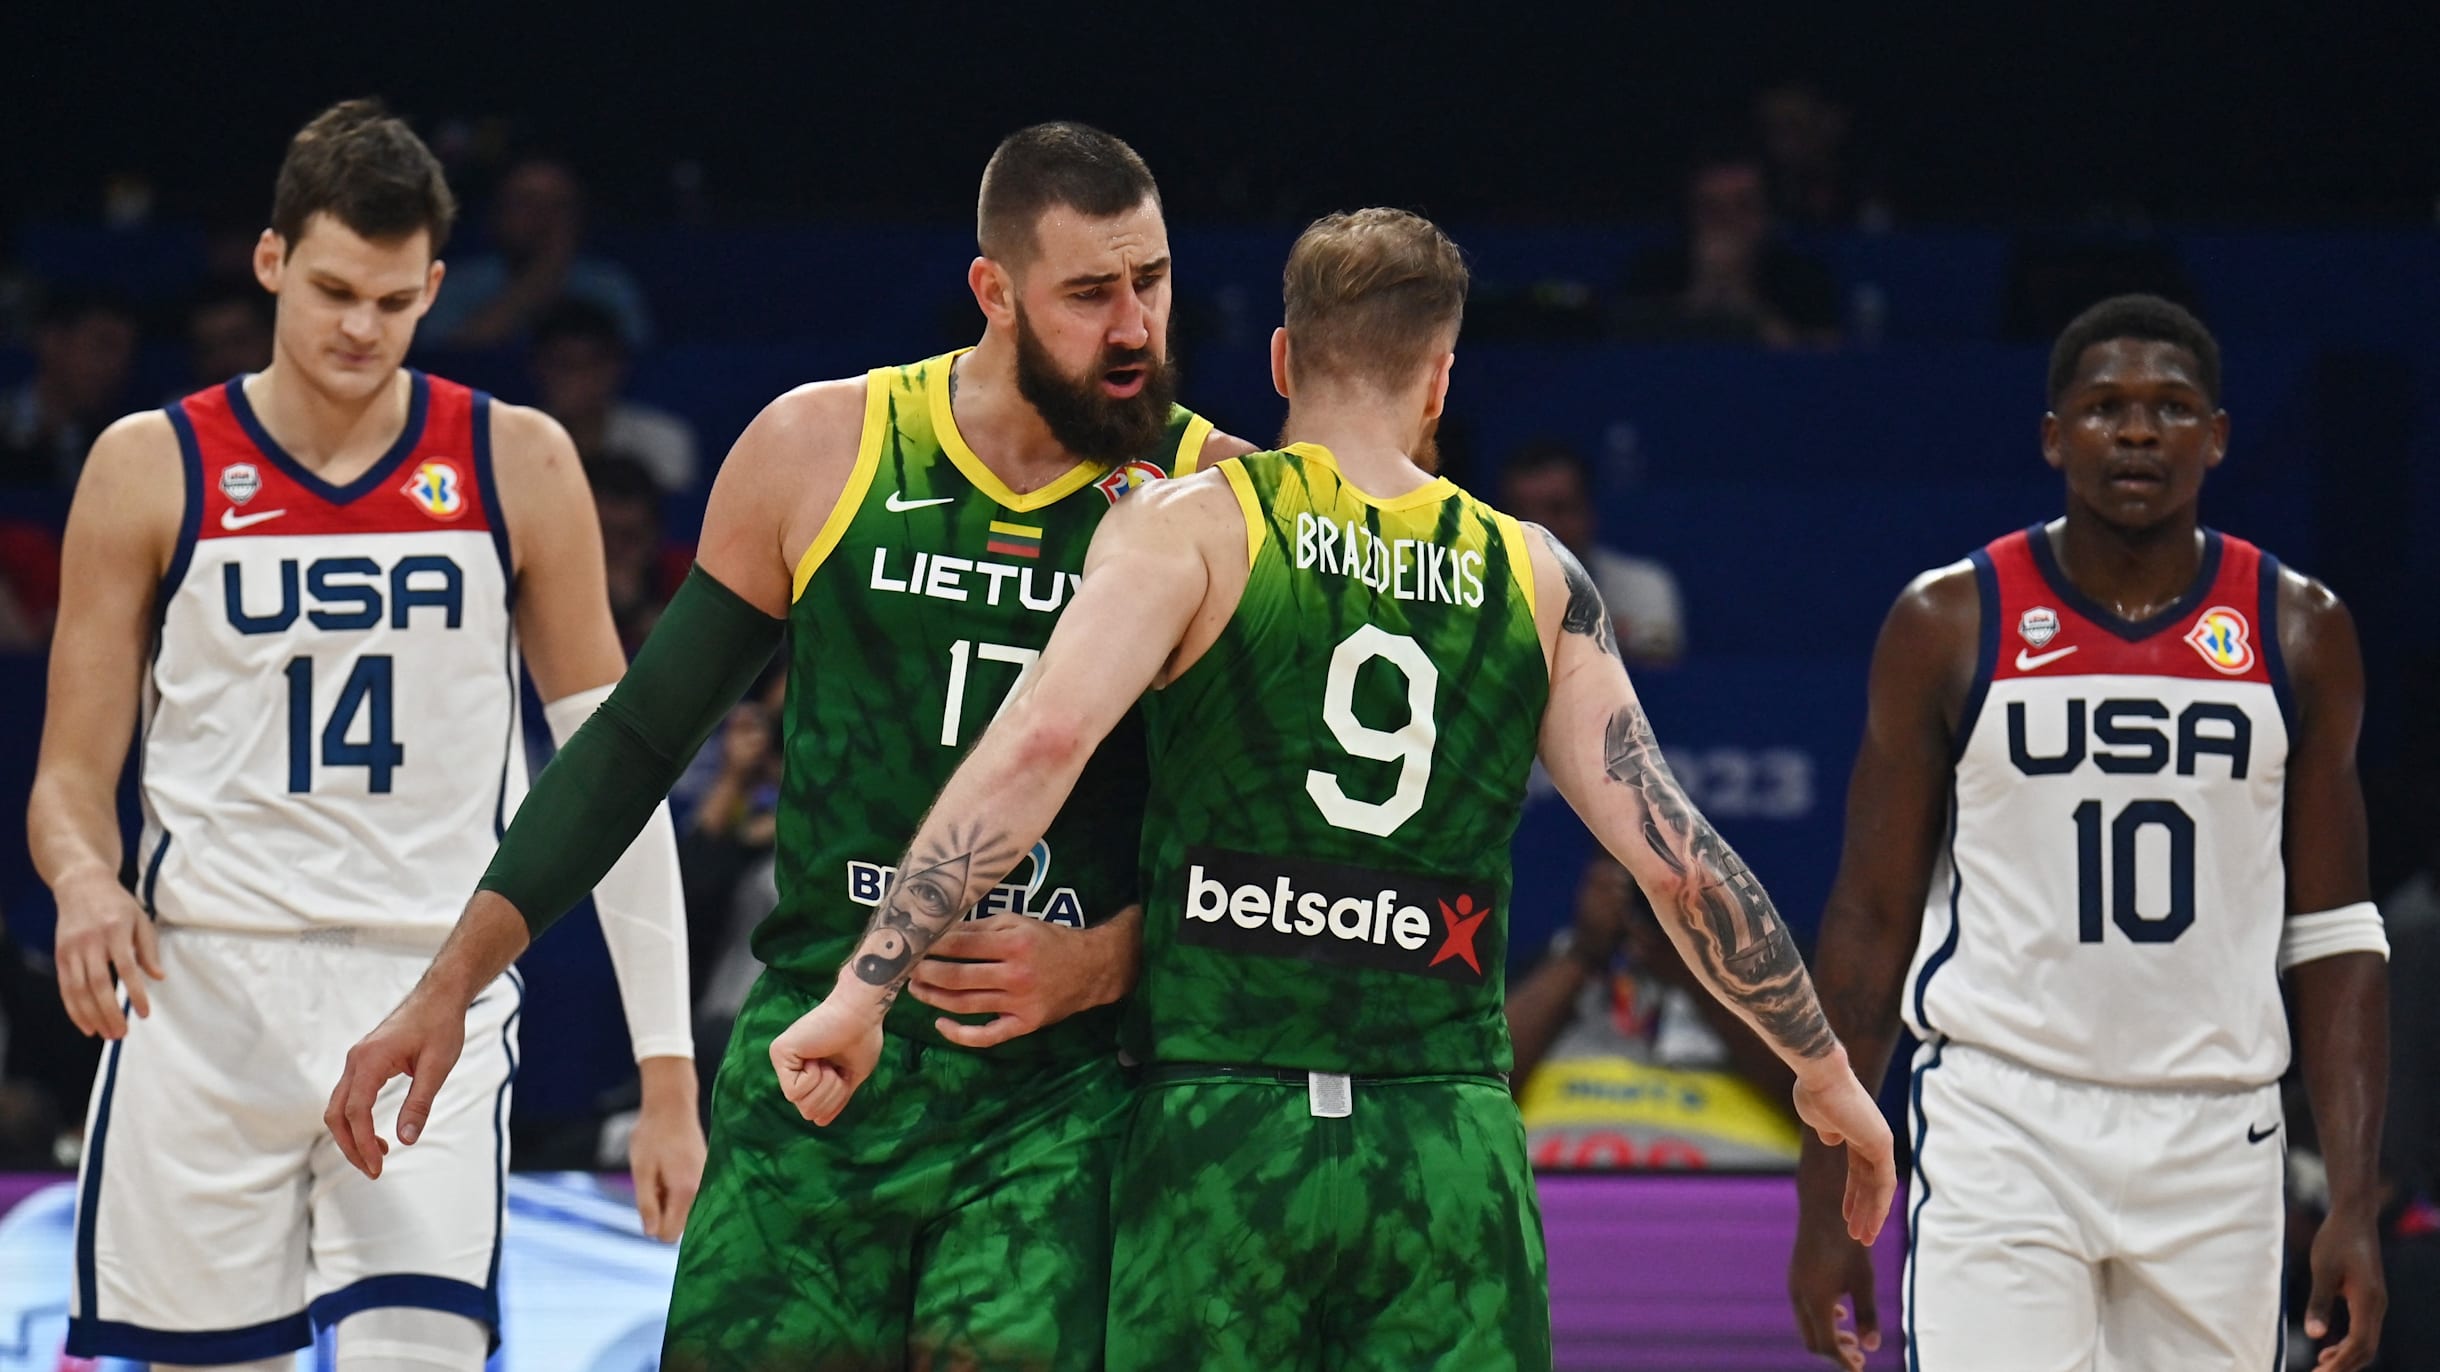 BRAZILIAN BASKETBALL TEAM MAKES ITS DUBUT IN THE WORLD CUP QUALIFIERS